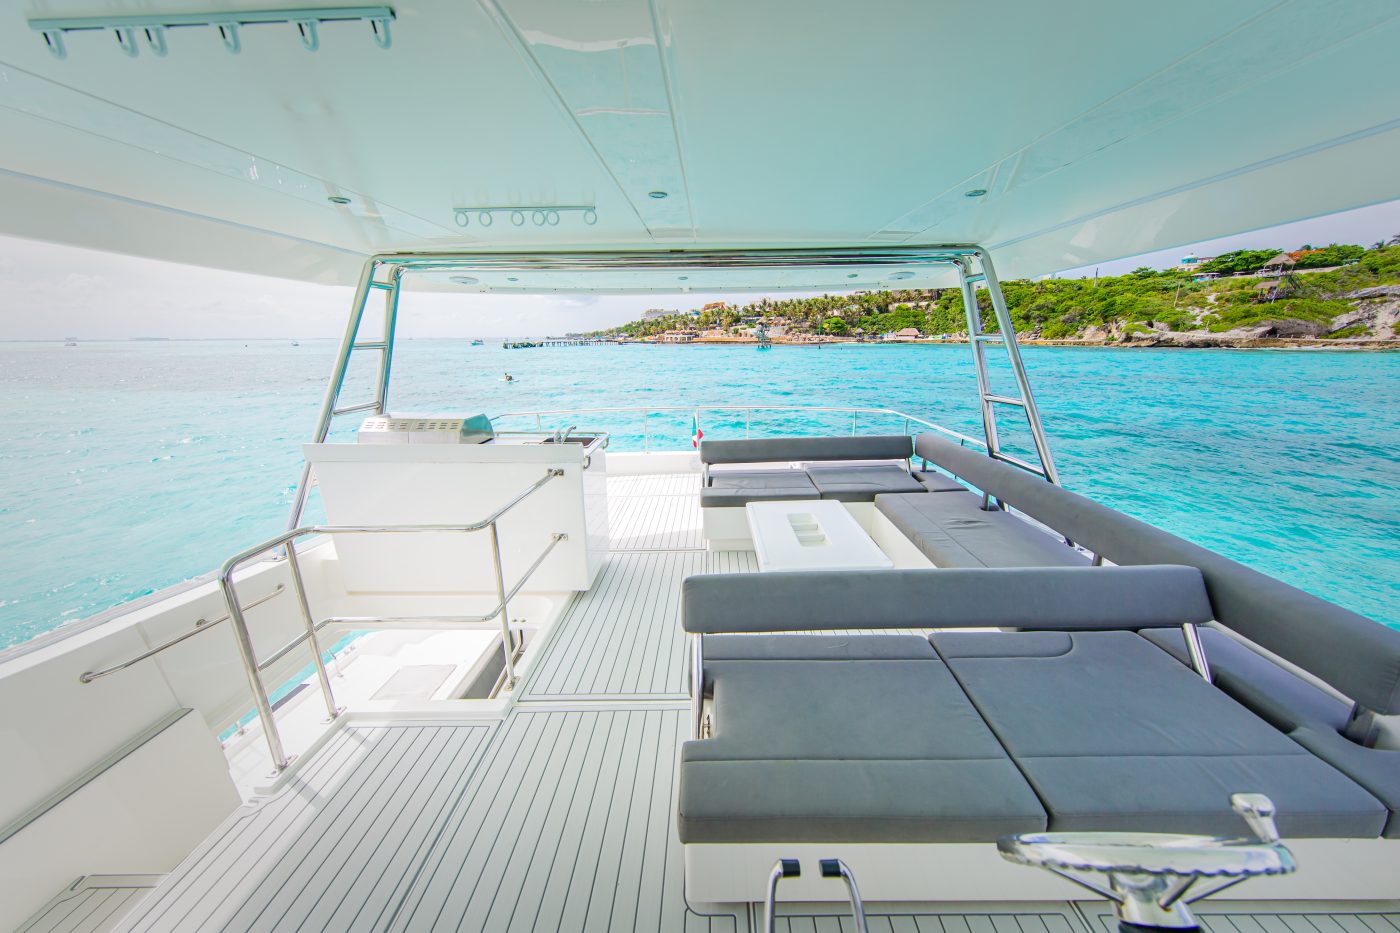 Leopard Catamaran for Luxury Yacht Charters from Cancun lounge